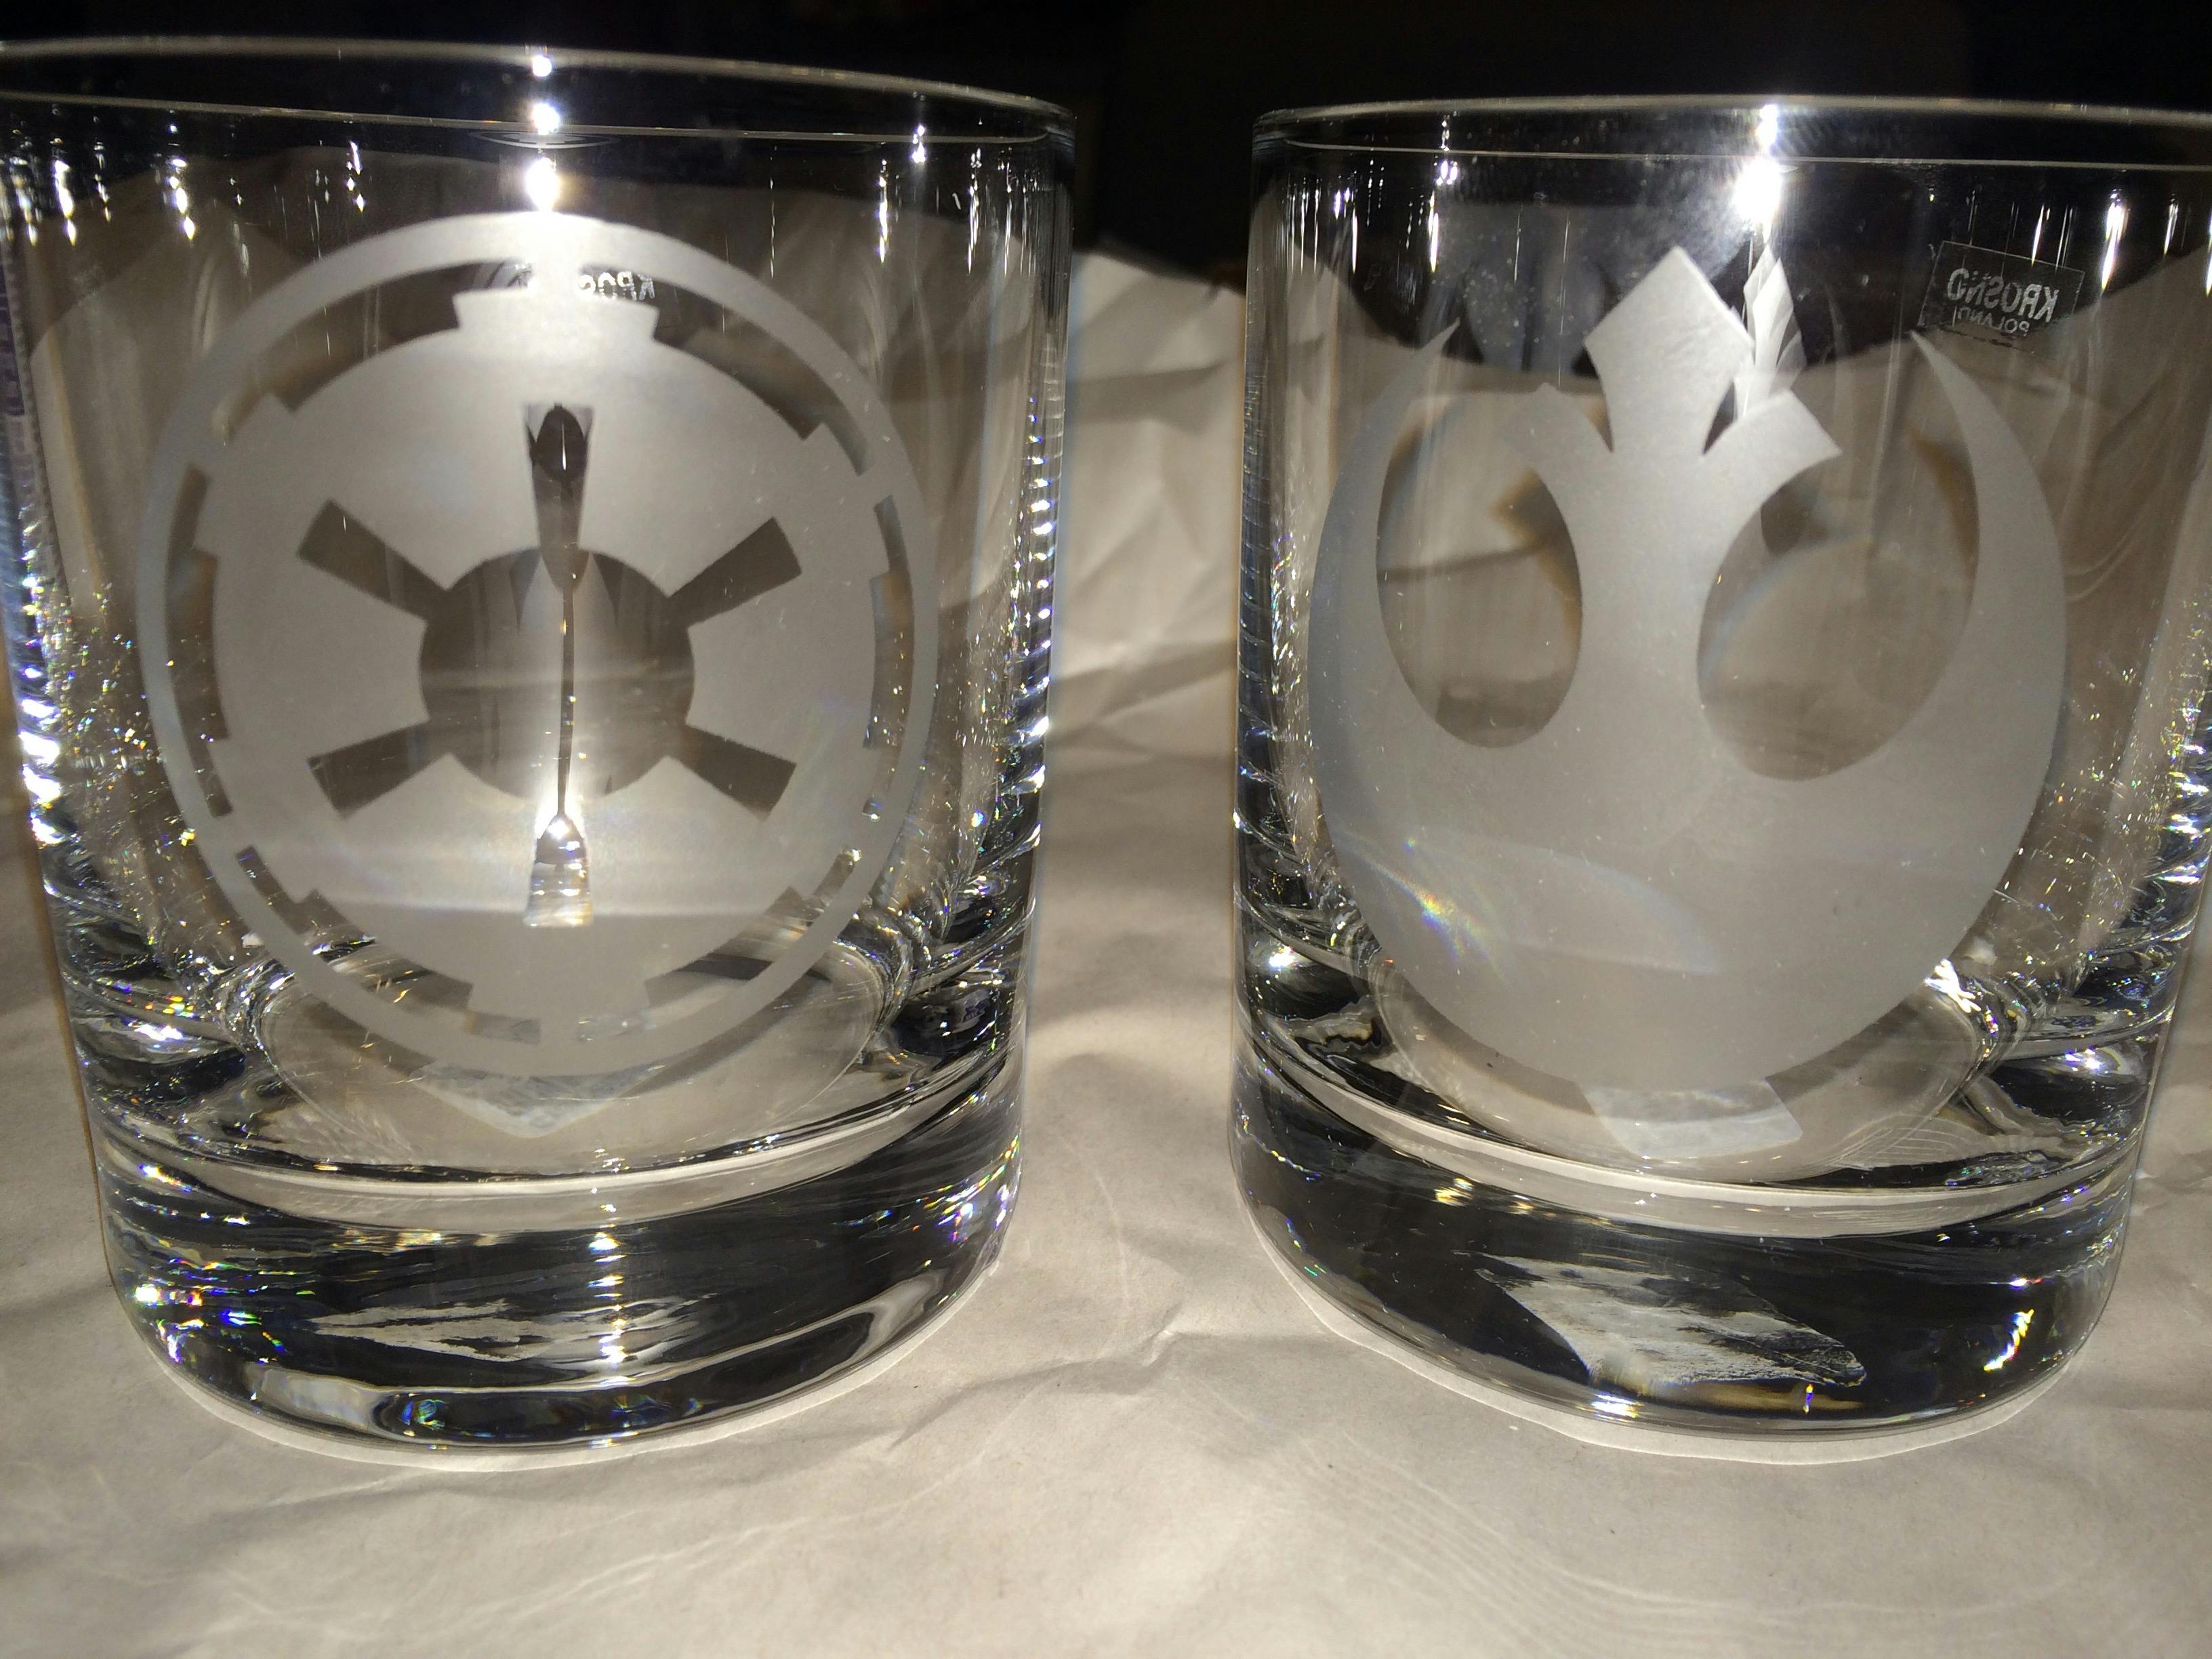 Here's how to etch your own 'Star Wars' drinking glasses